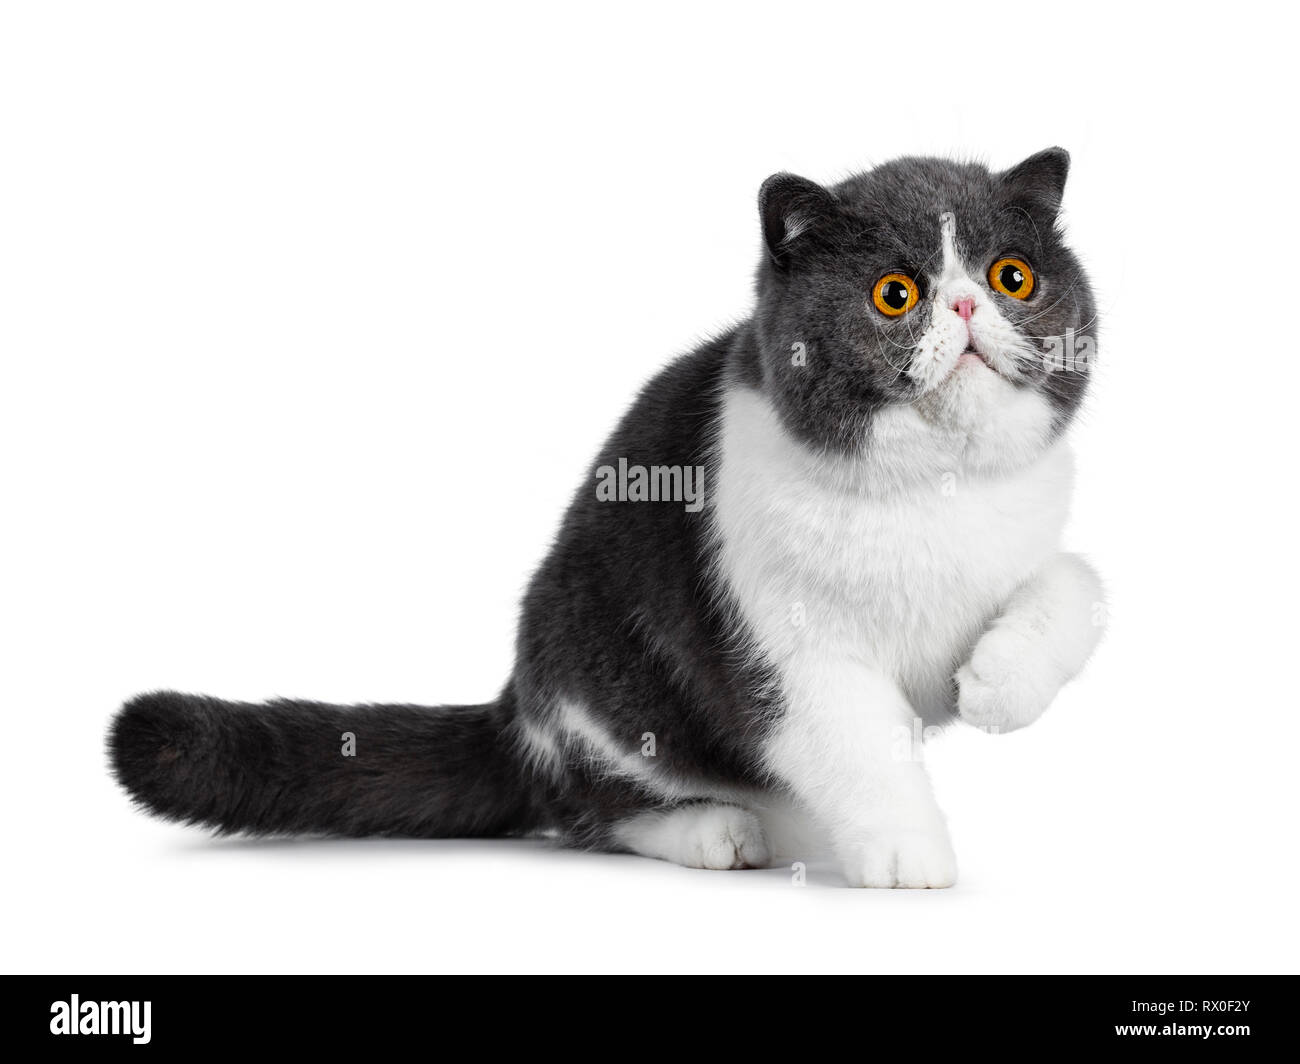 Blue with white young Exotic Shorthair cat, sitting side ways. Looking up with amazing round orange eyes. Isolated on white background. One paw in air Stock Photo